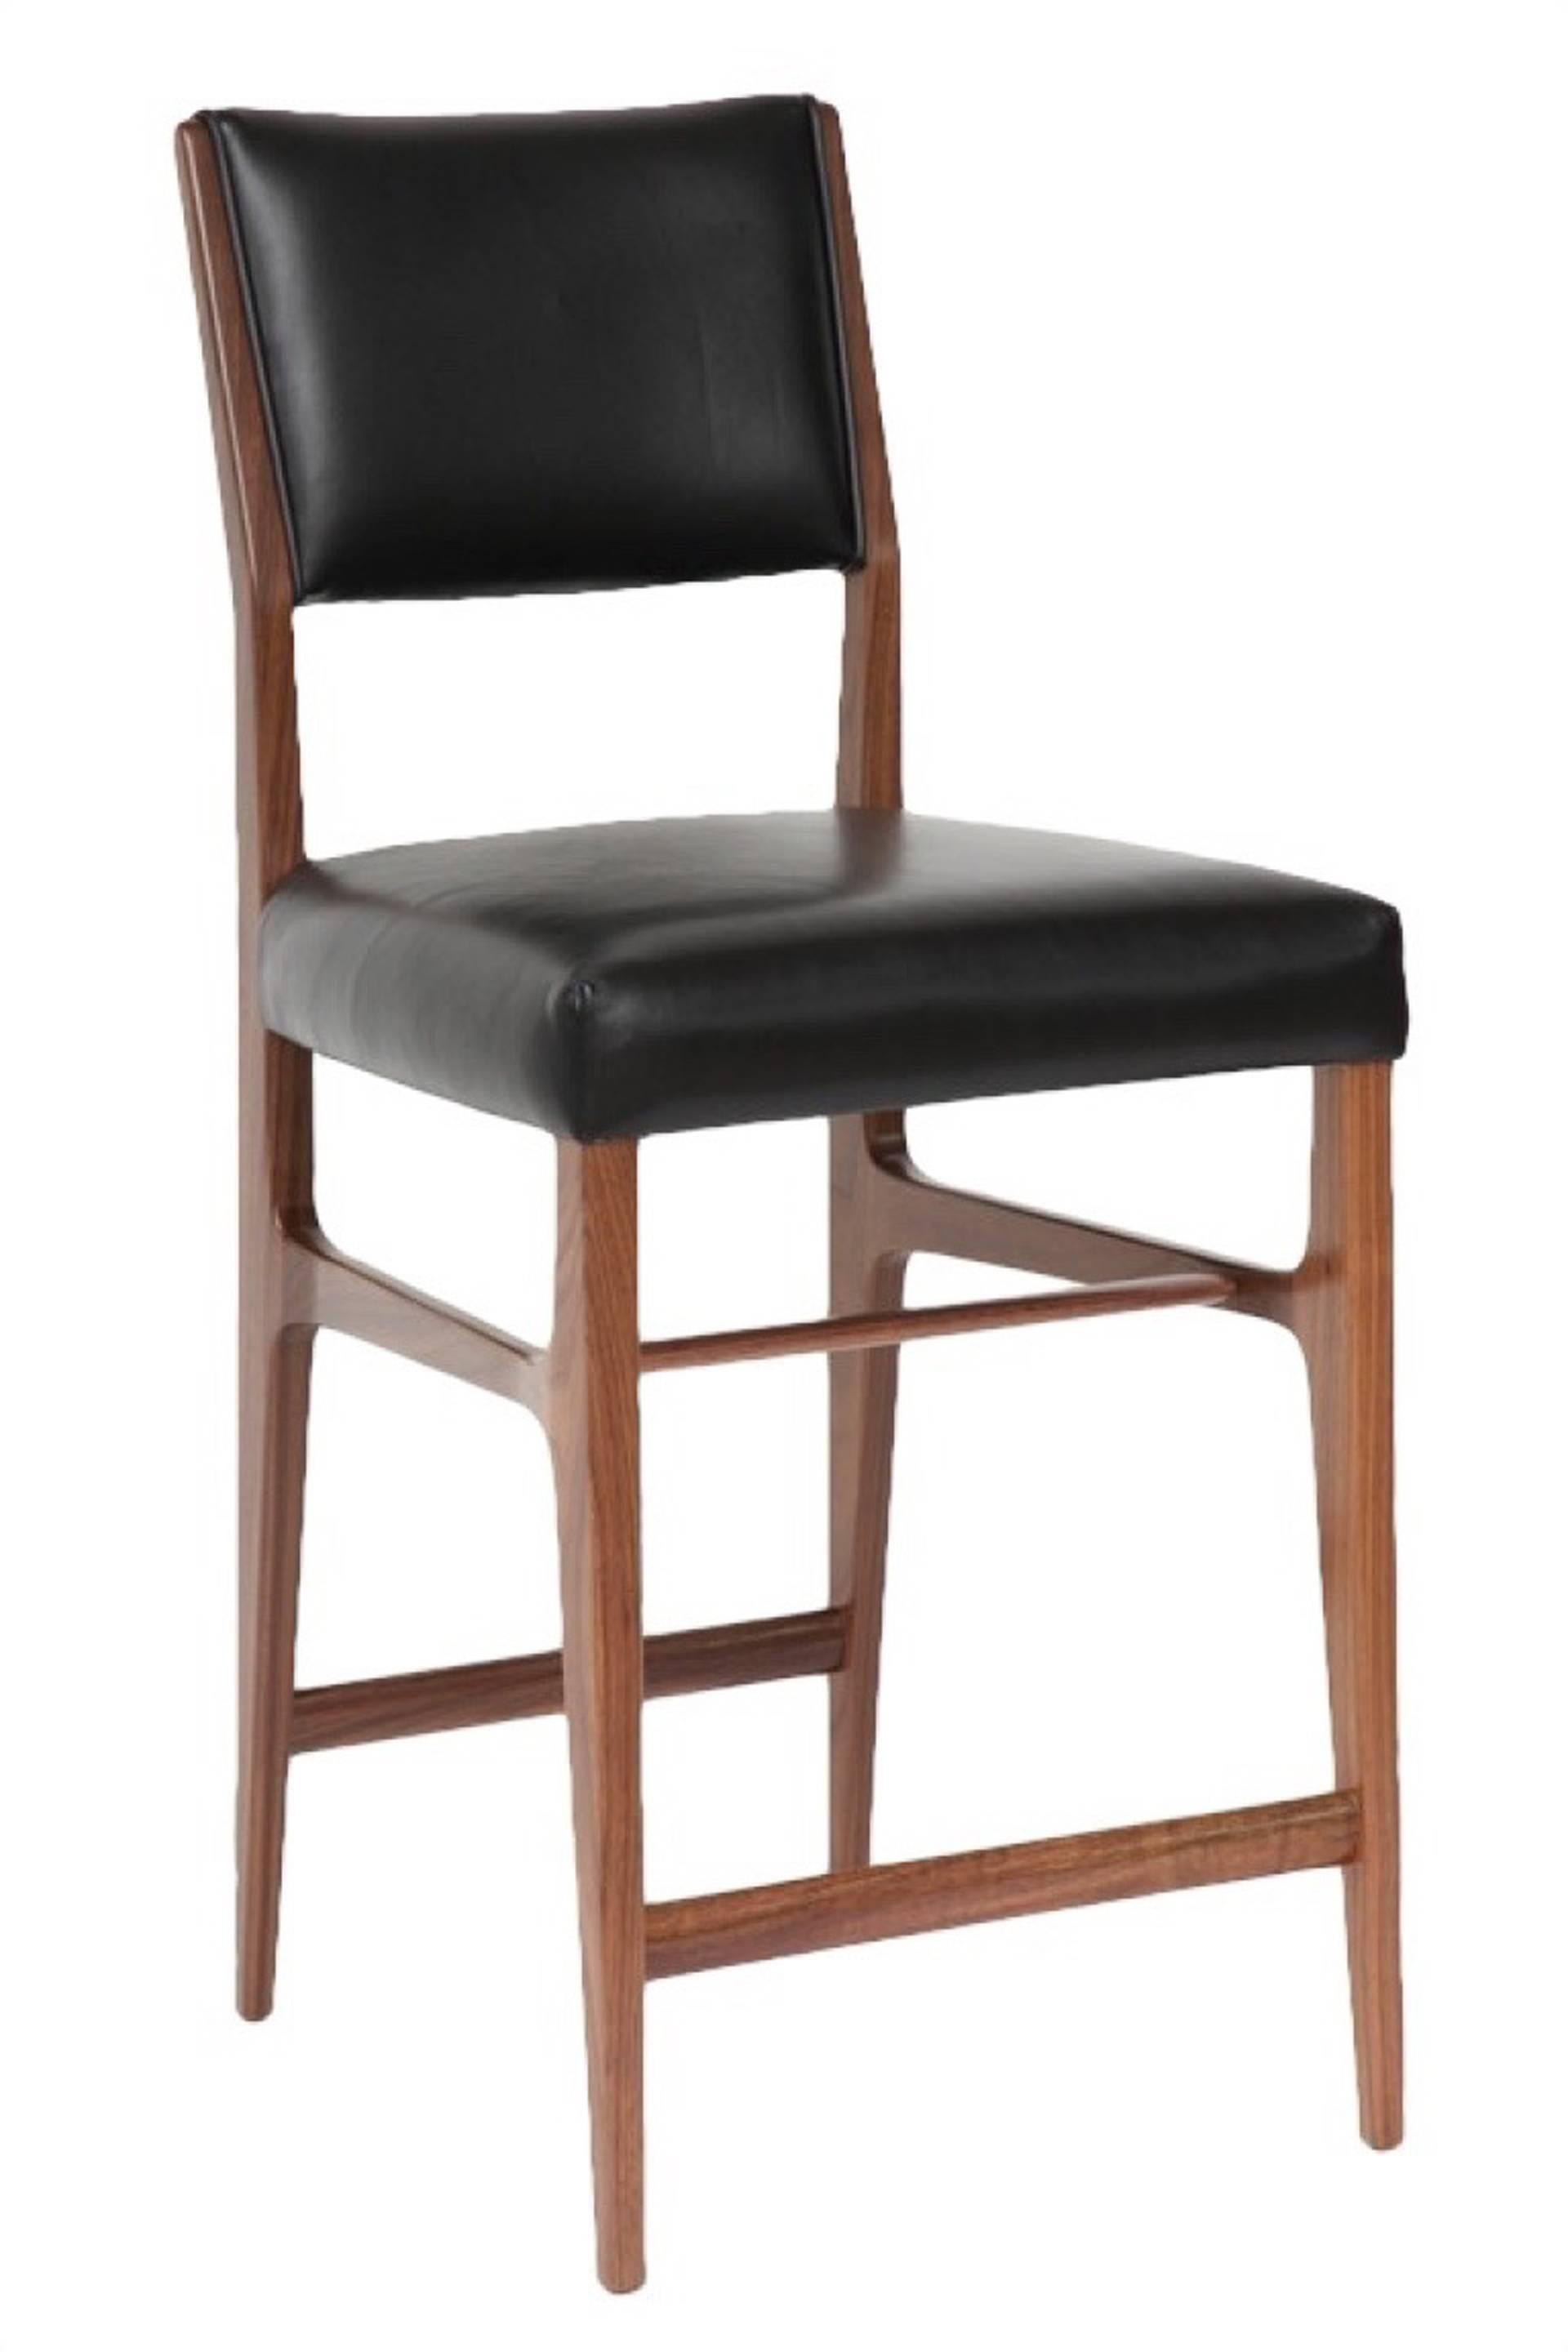 Maze walnut counter stool.
Seat Height-25”
Custom orders have a lead time of 8-10 weeks FOB NYC. Lead time contingent upon selection of finishes, approval of shop drawings (if applicable), and receipt of 1.5 yards COM / 30 sq. feet COL (if